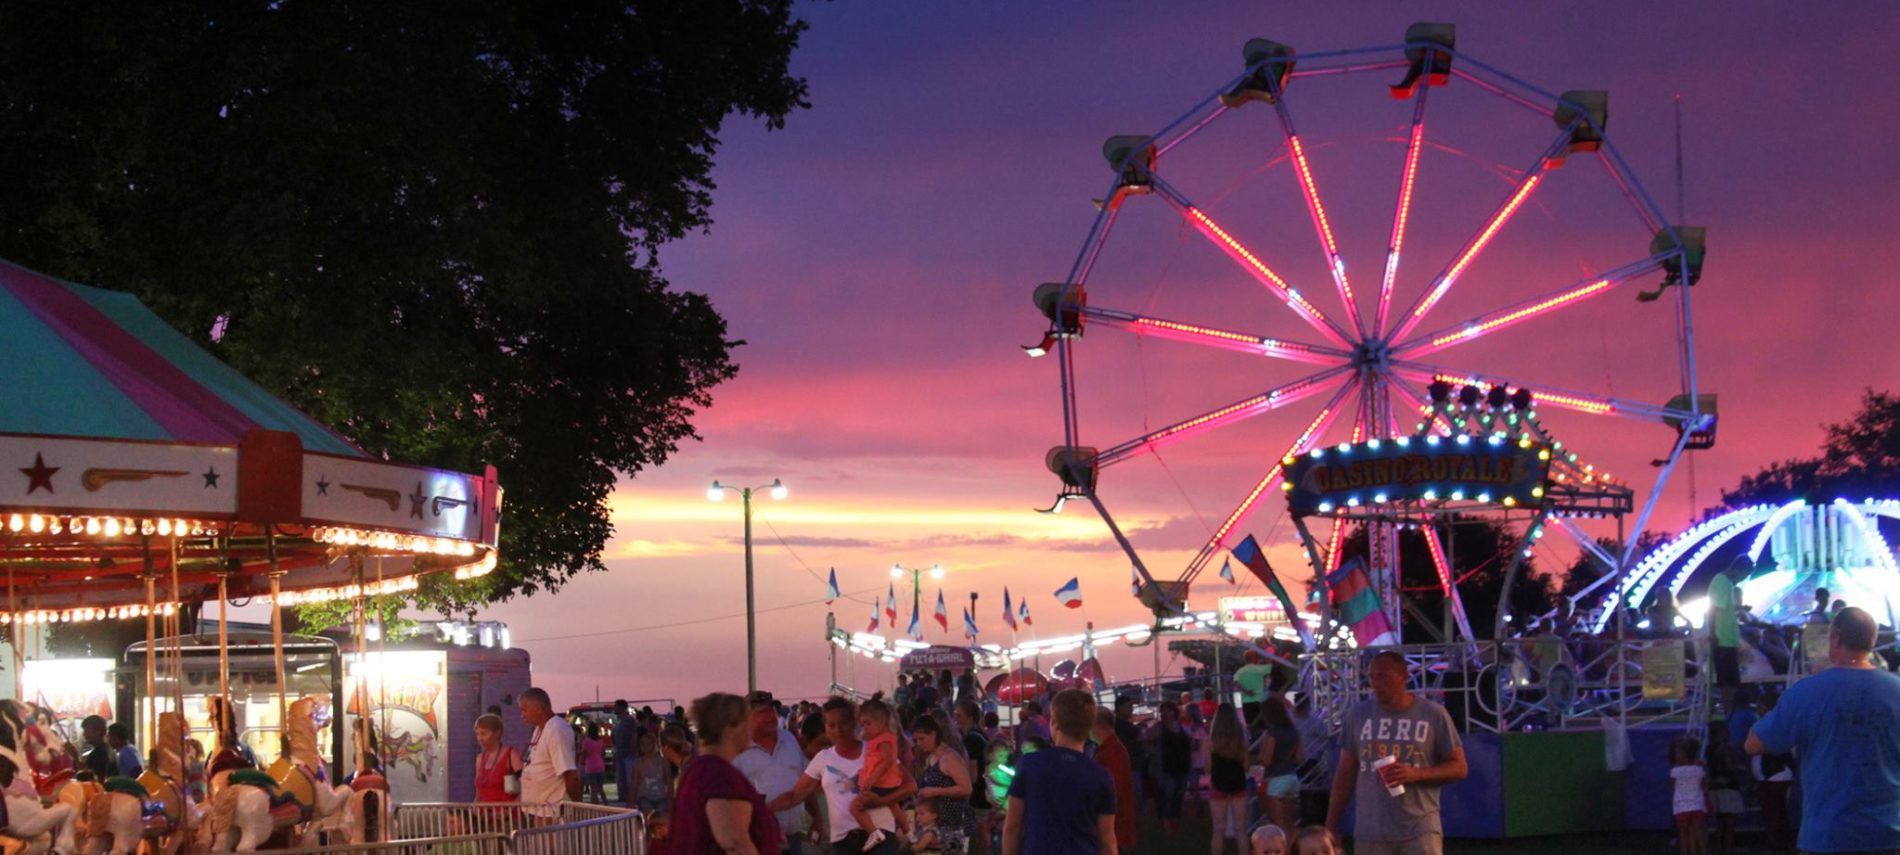 Sunset over Ferris wheel, merry-go-round and rides at the Clinton County Fair.